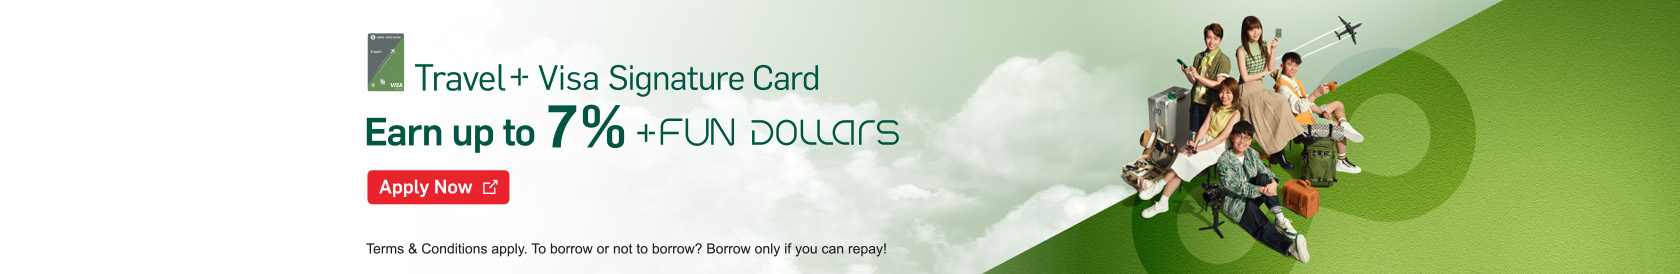 Travel+ Visa Signature Card Earn up to 7% +FUN Dollars for foreign currency spending